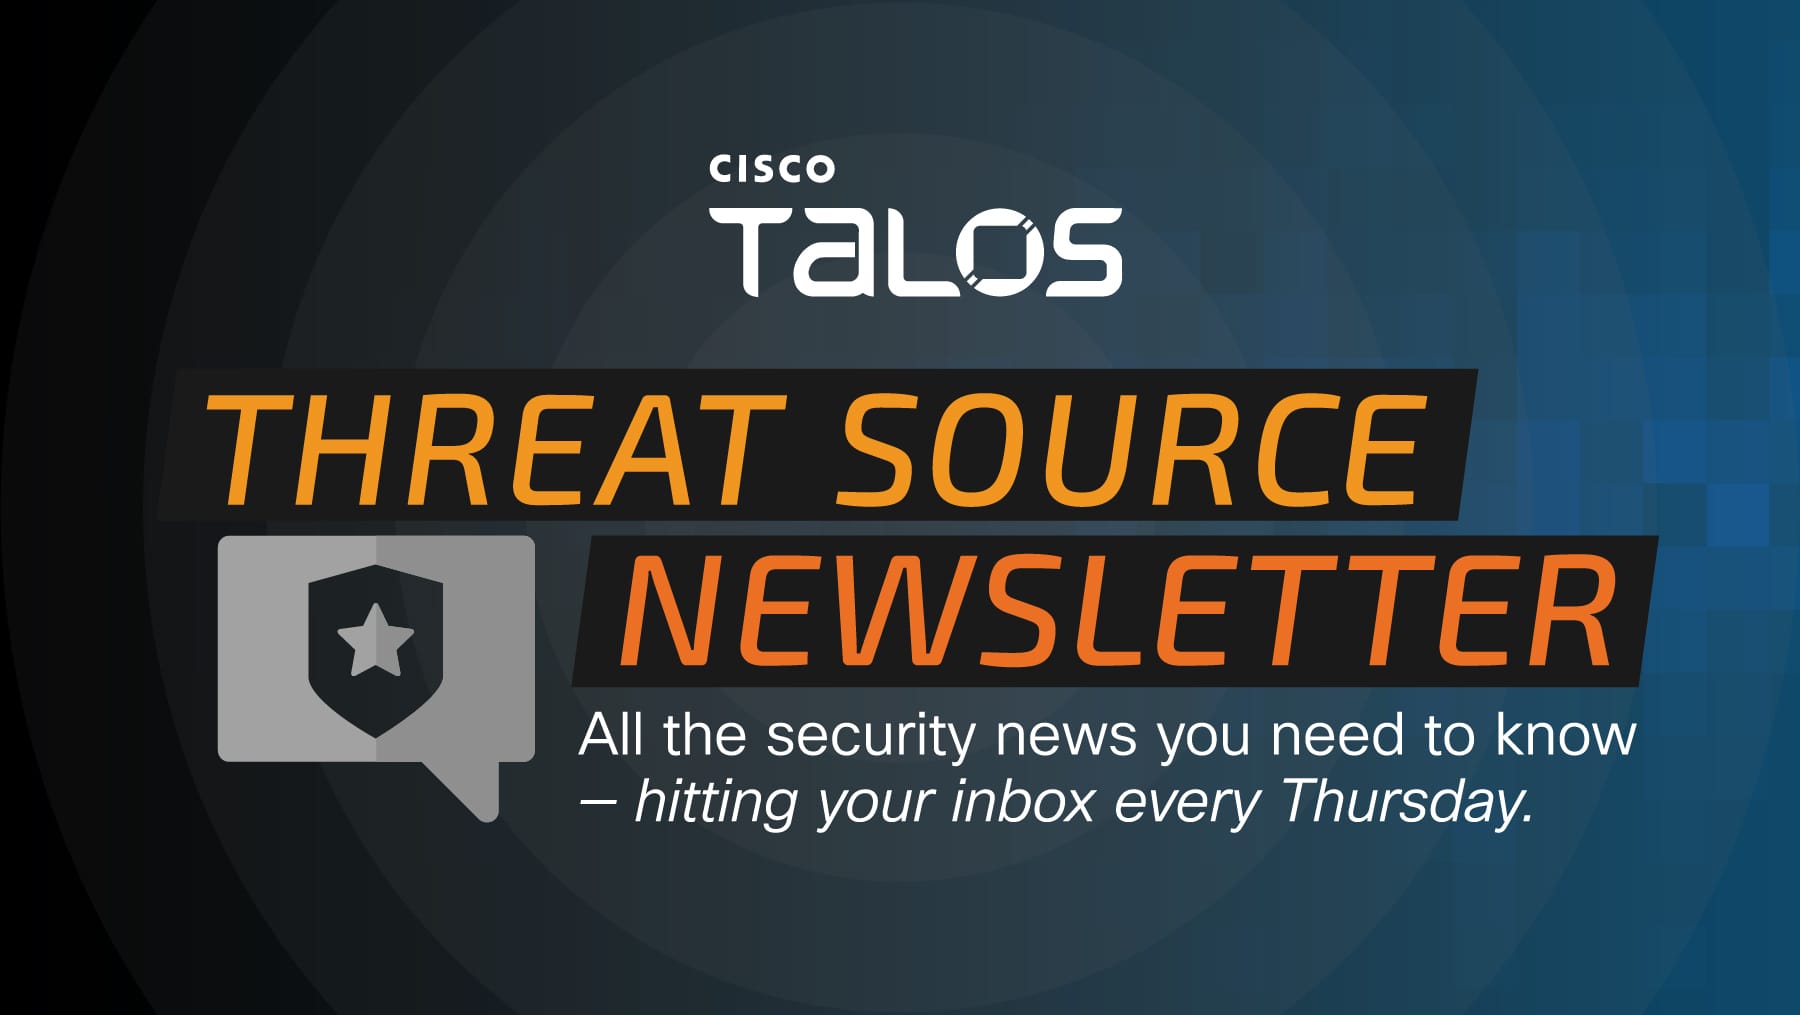 Rounding up some of the major headlines from RSA